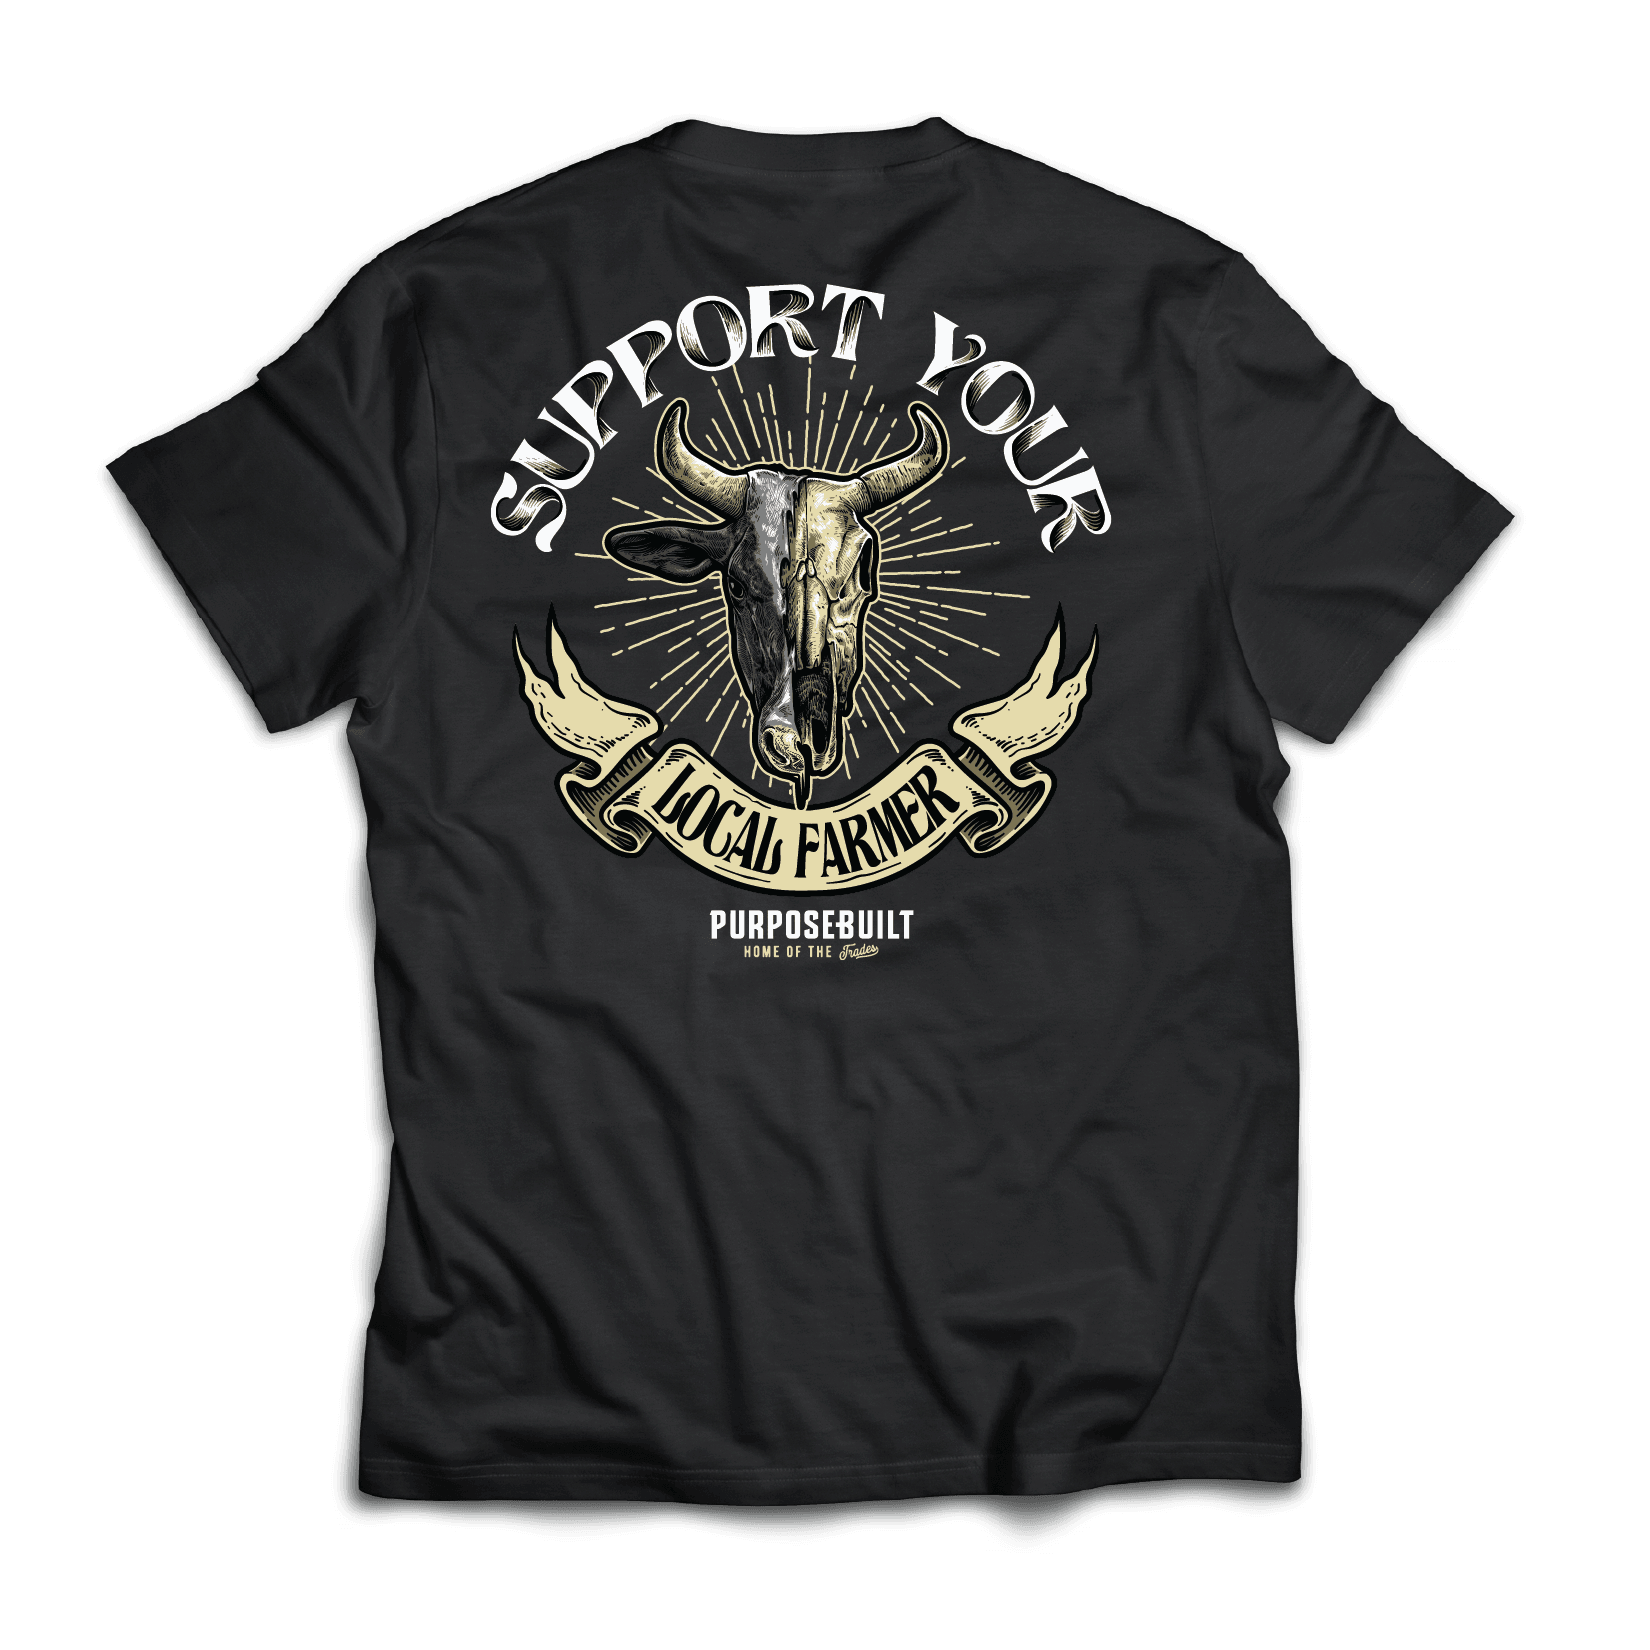 Support Your Local Farmer Tee, Black - Purpose-Built / Home of the Trades